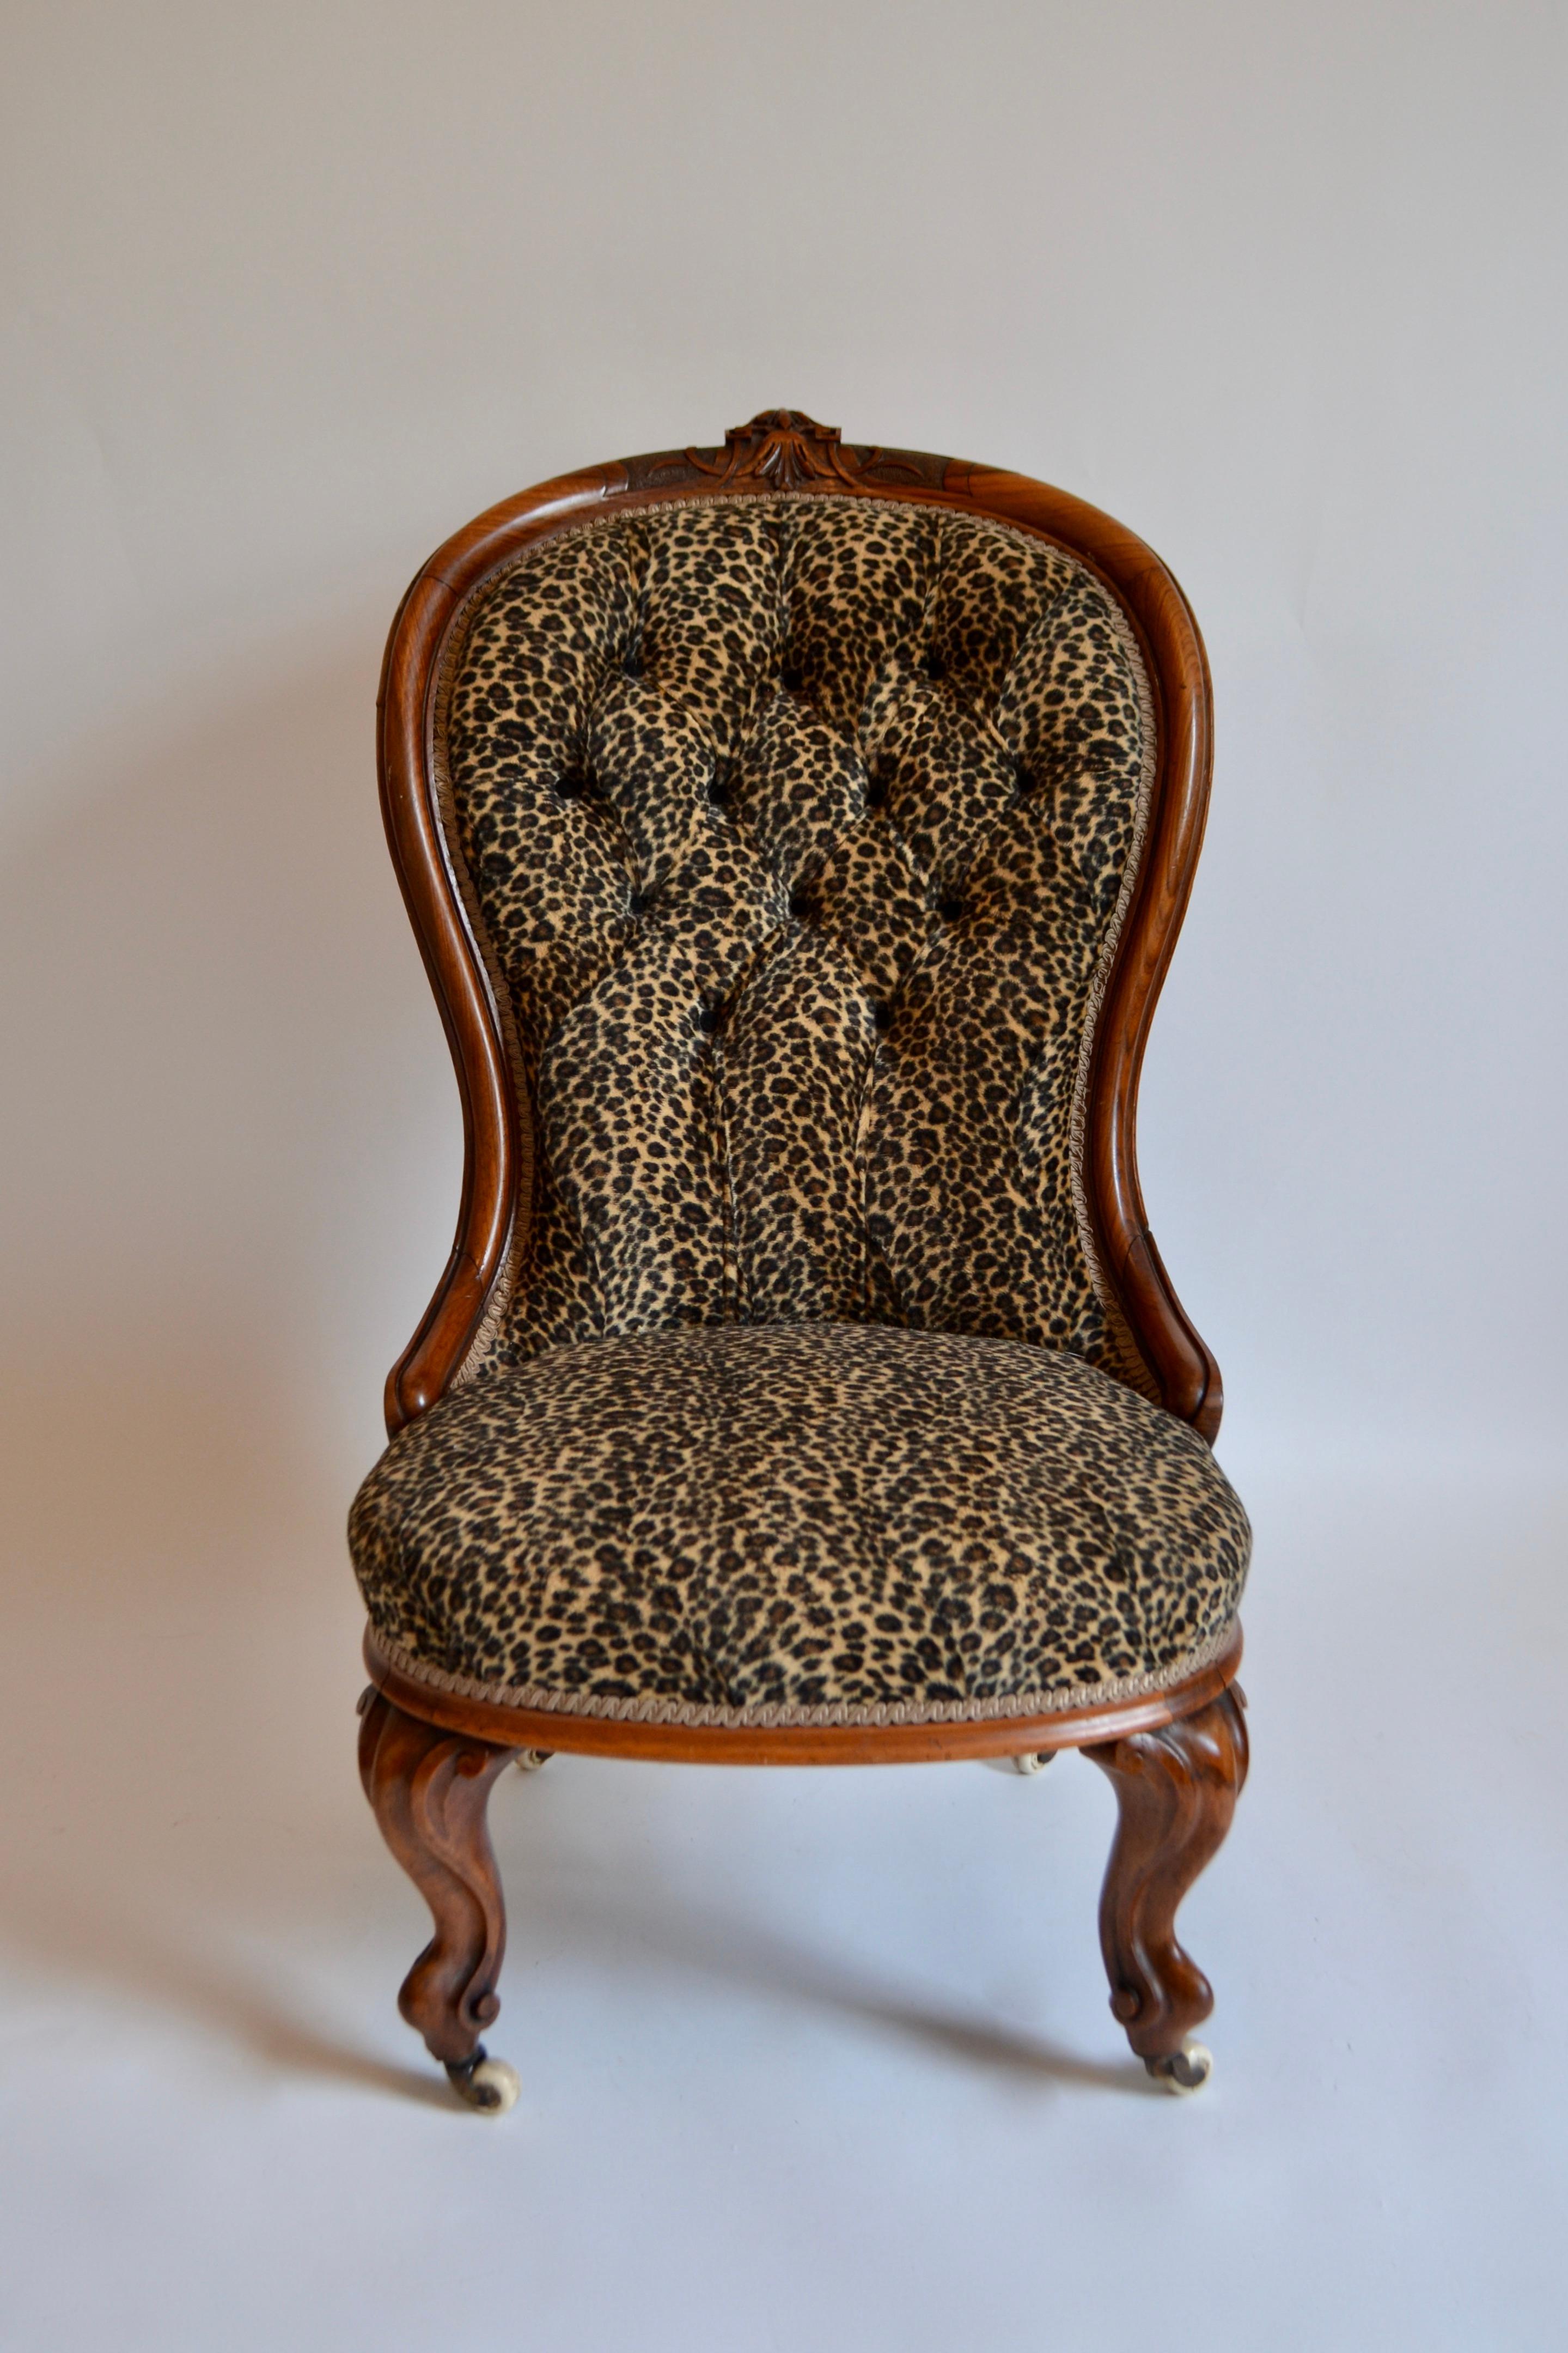 British Pair of Victorian Walnut Chairs Upholstered in Faux Leopard Skin, 19th Century